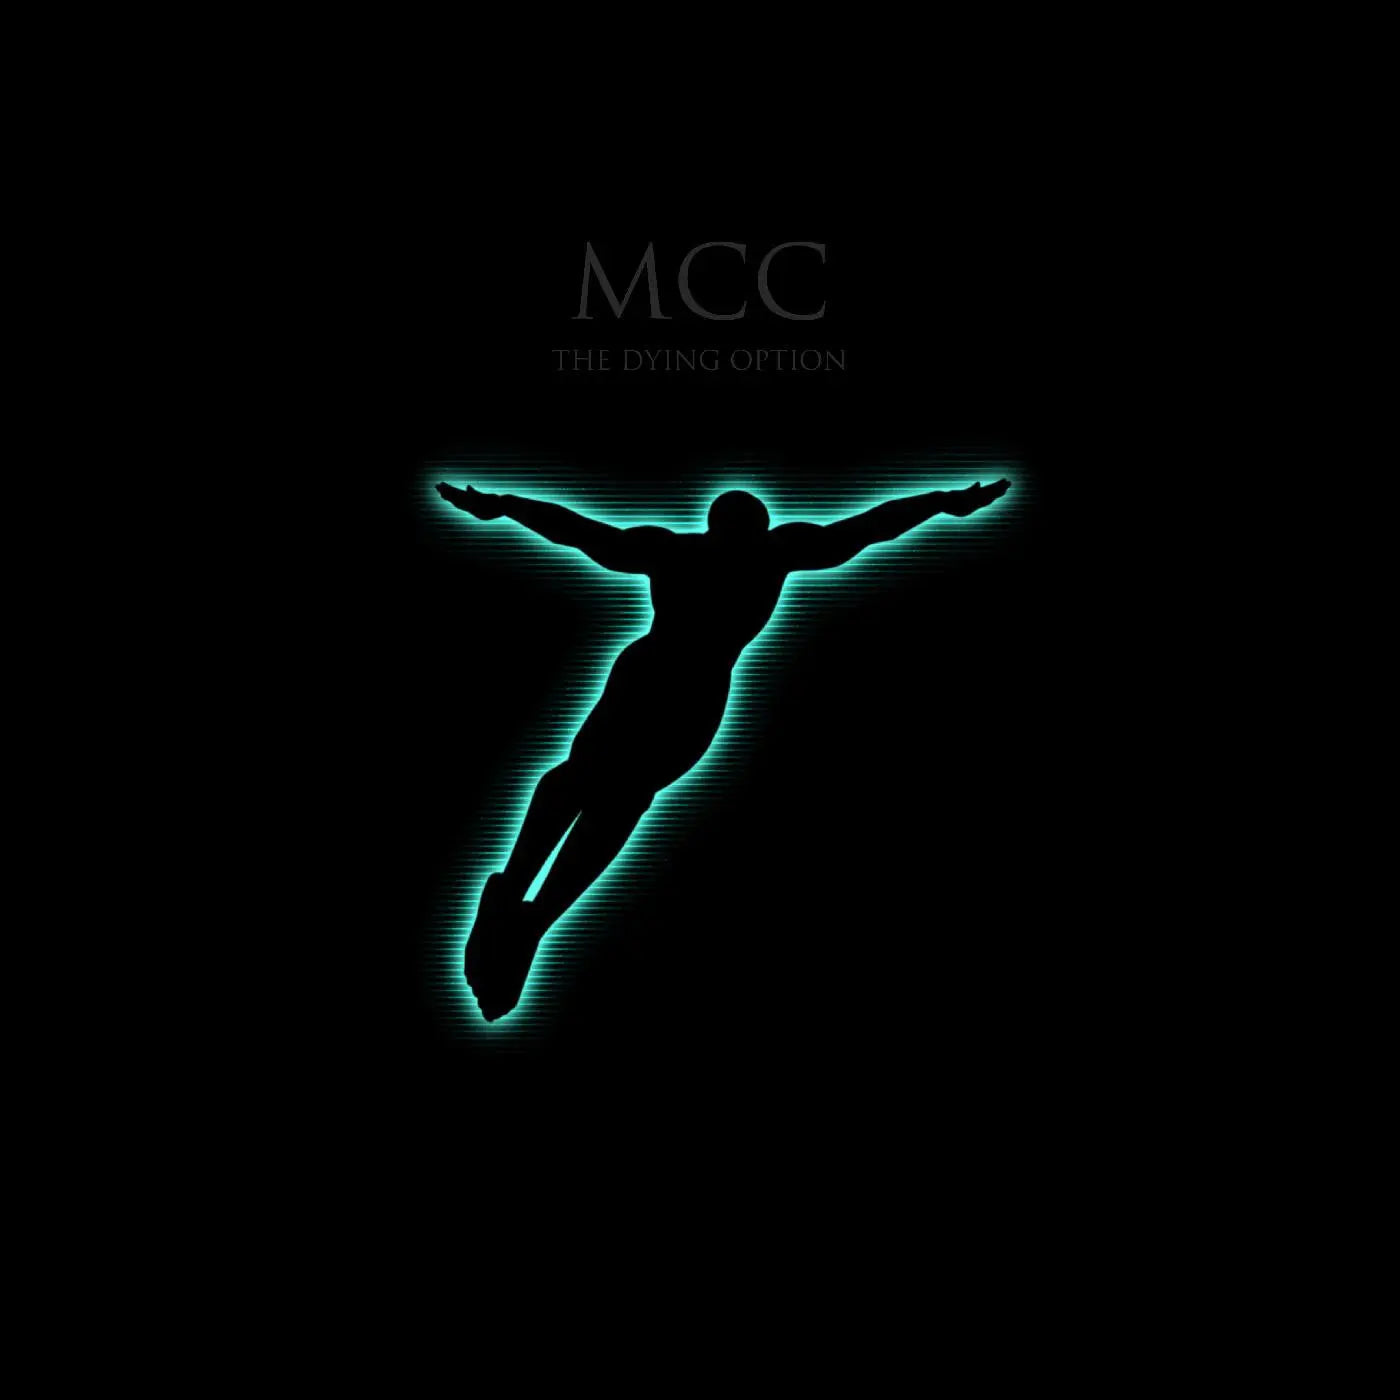 MCC [Magna Carta Cartel] - The Dying Option [Limited Signed/Autographed Vinyl LP Indie Exclusive]